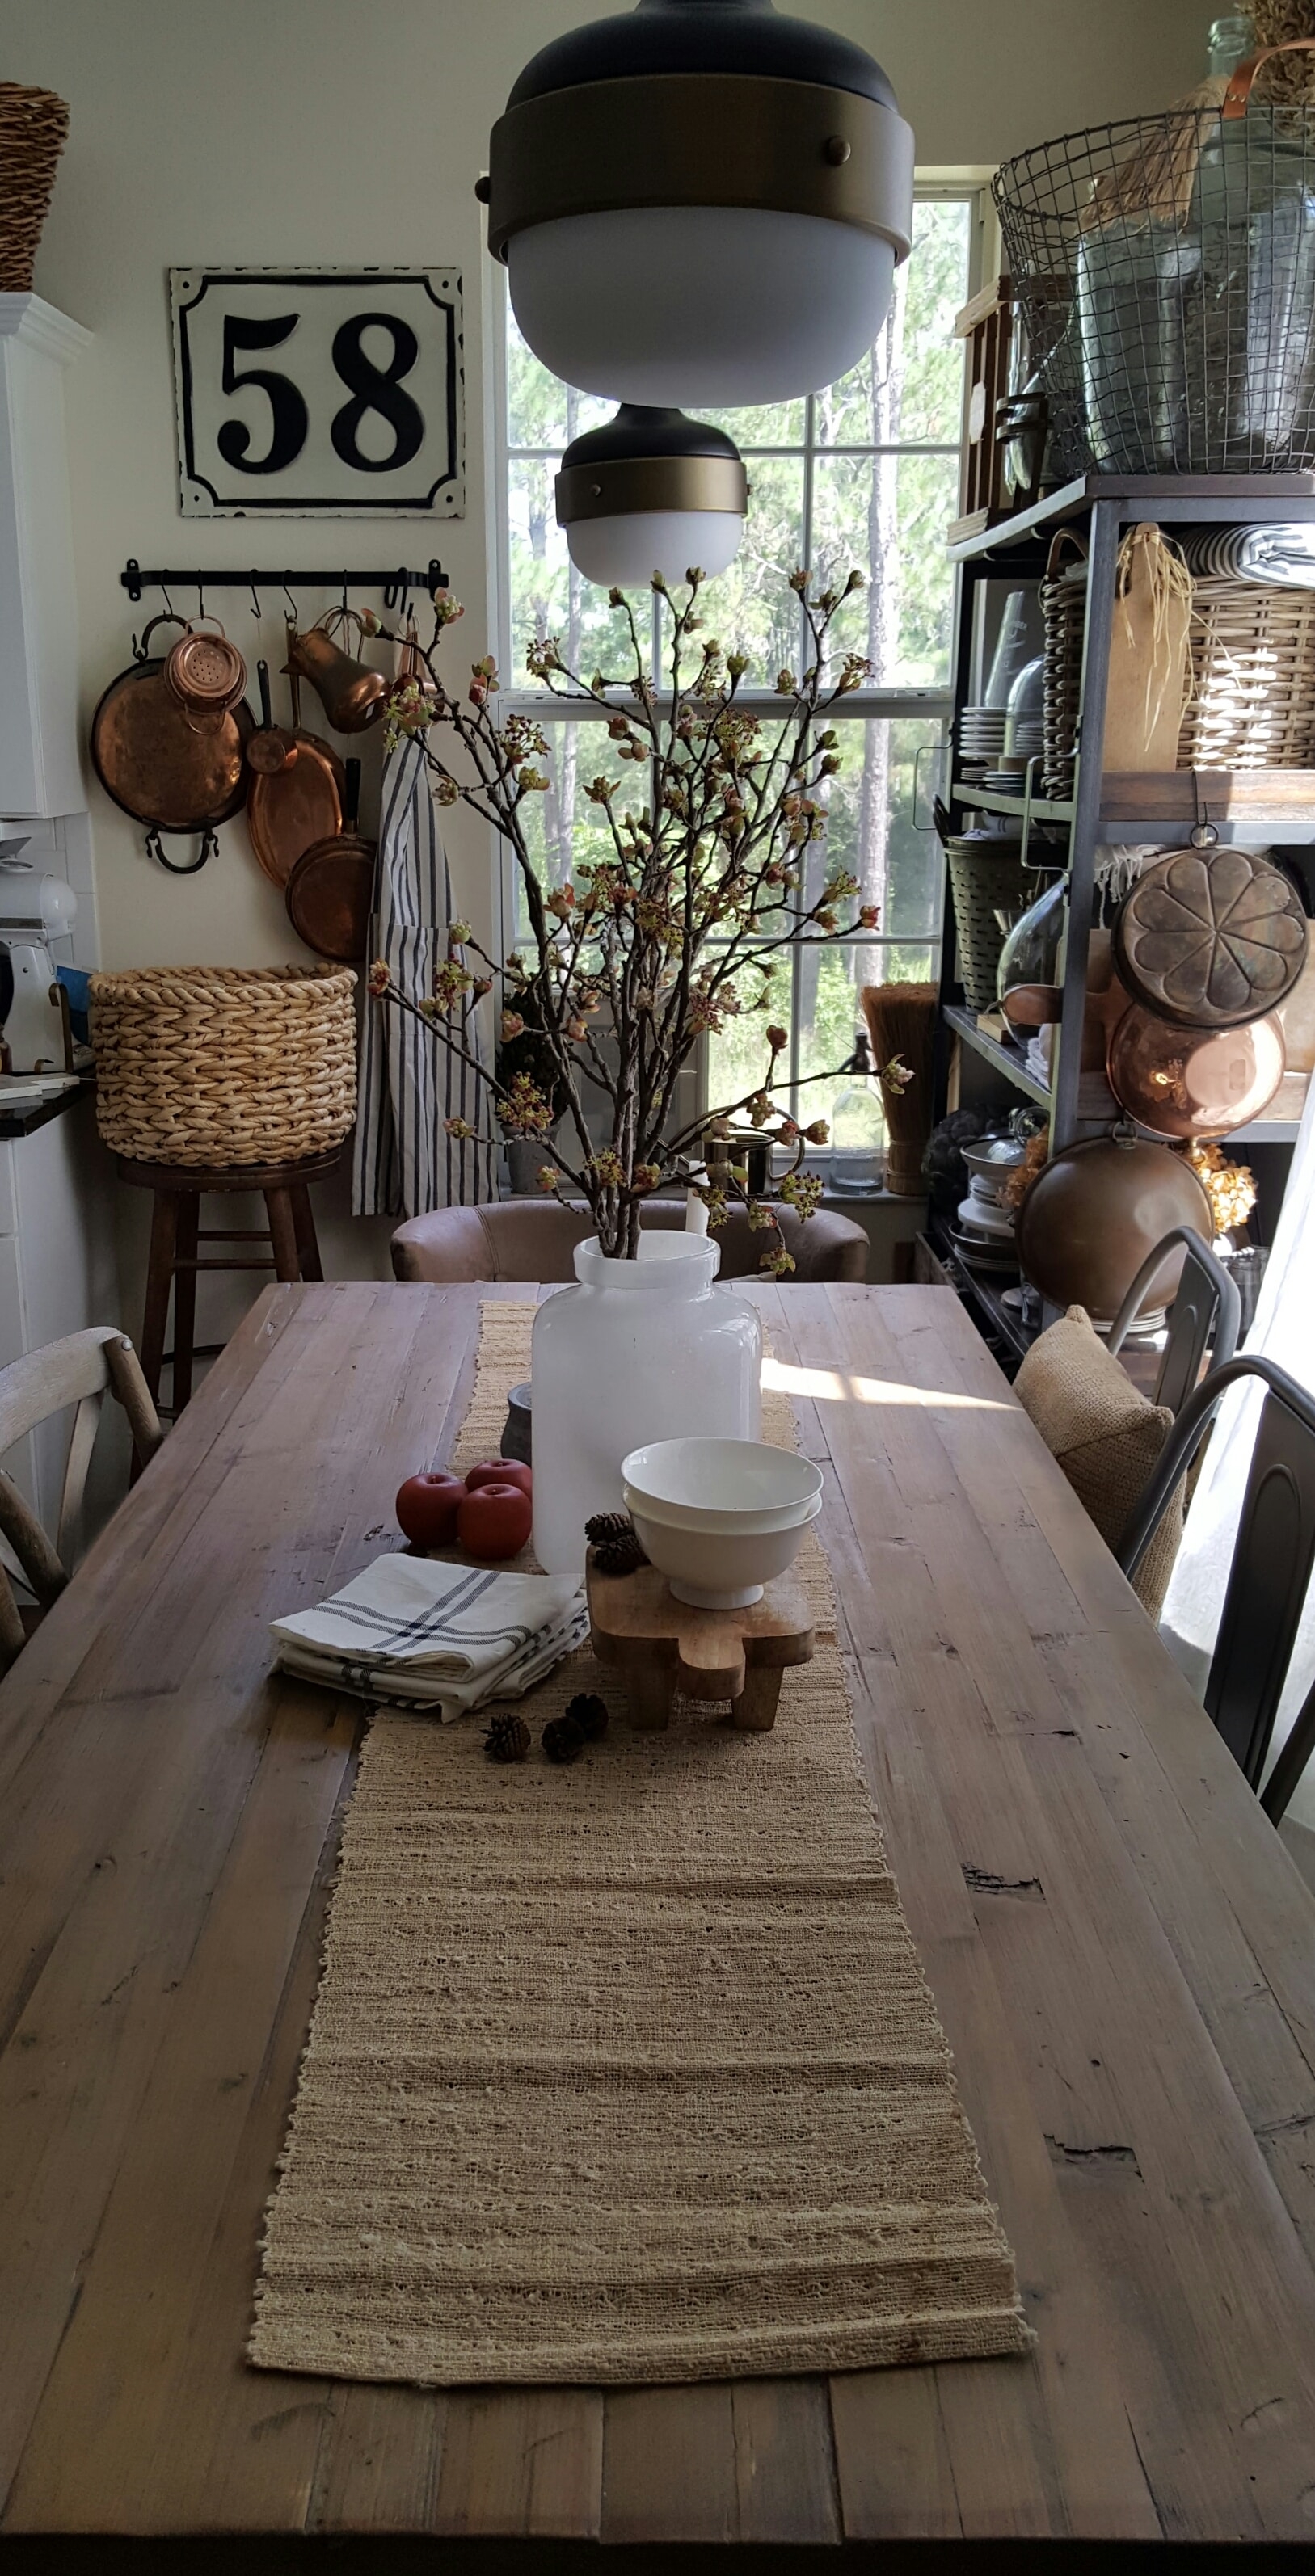 Shop the house design challenge Fall dining table Farmhouse kitchen decor white wood apples and blossoms